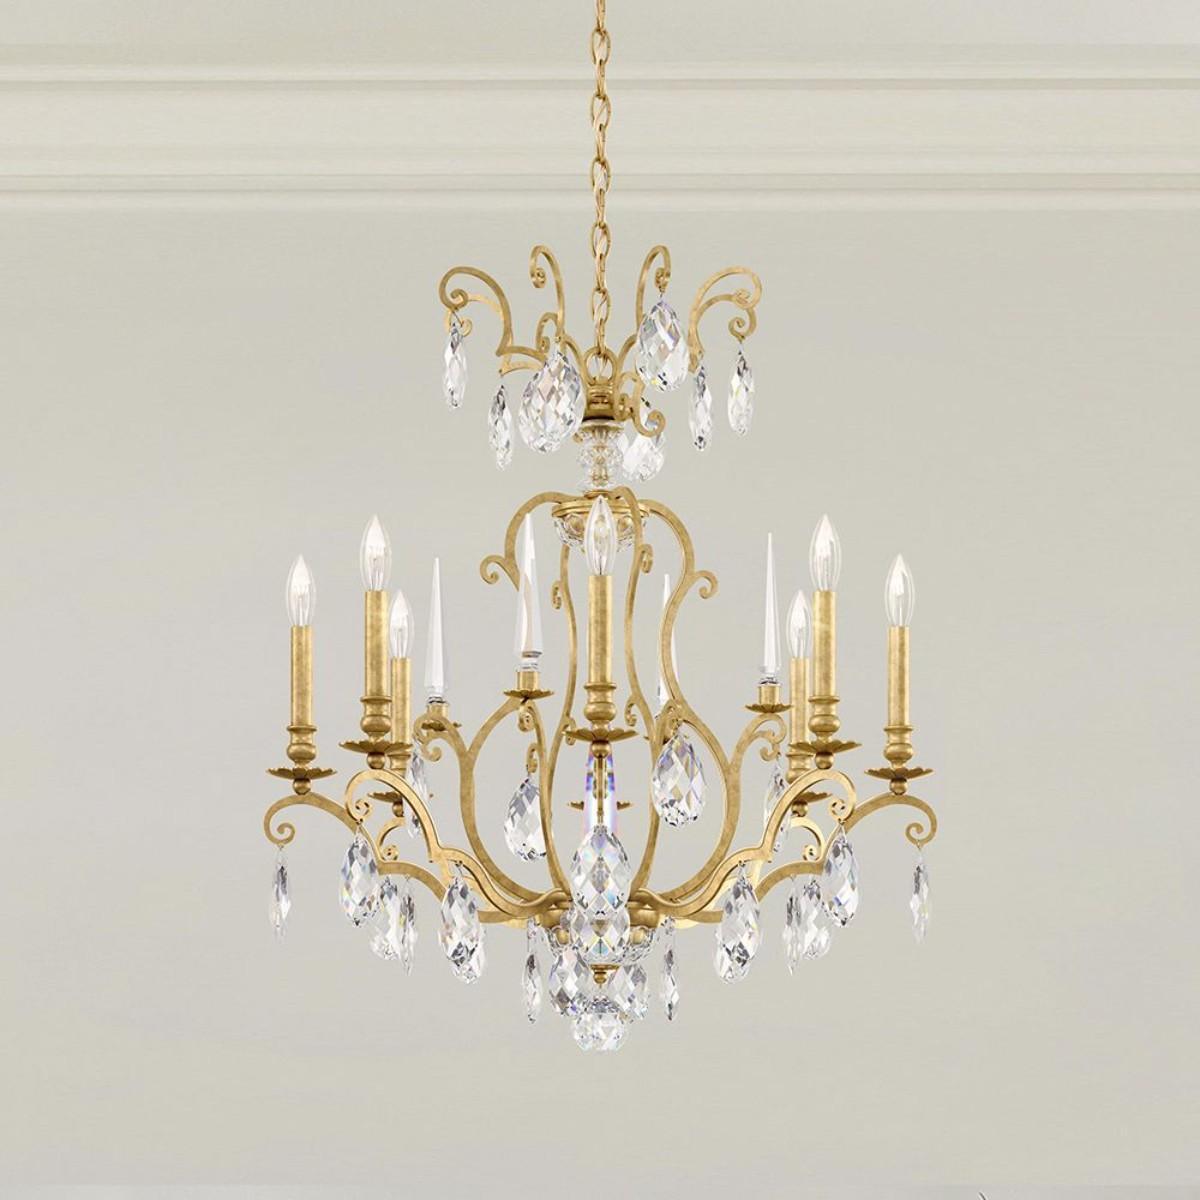 Renaissance Nouveau 8 Light Chandelier with Heritage Crystal - Bees Lighting